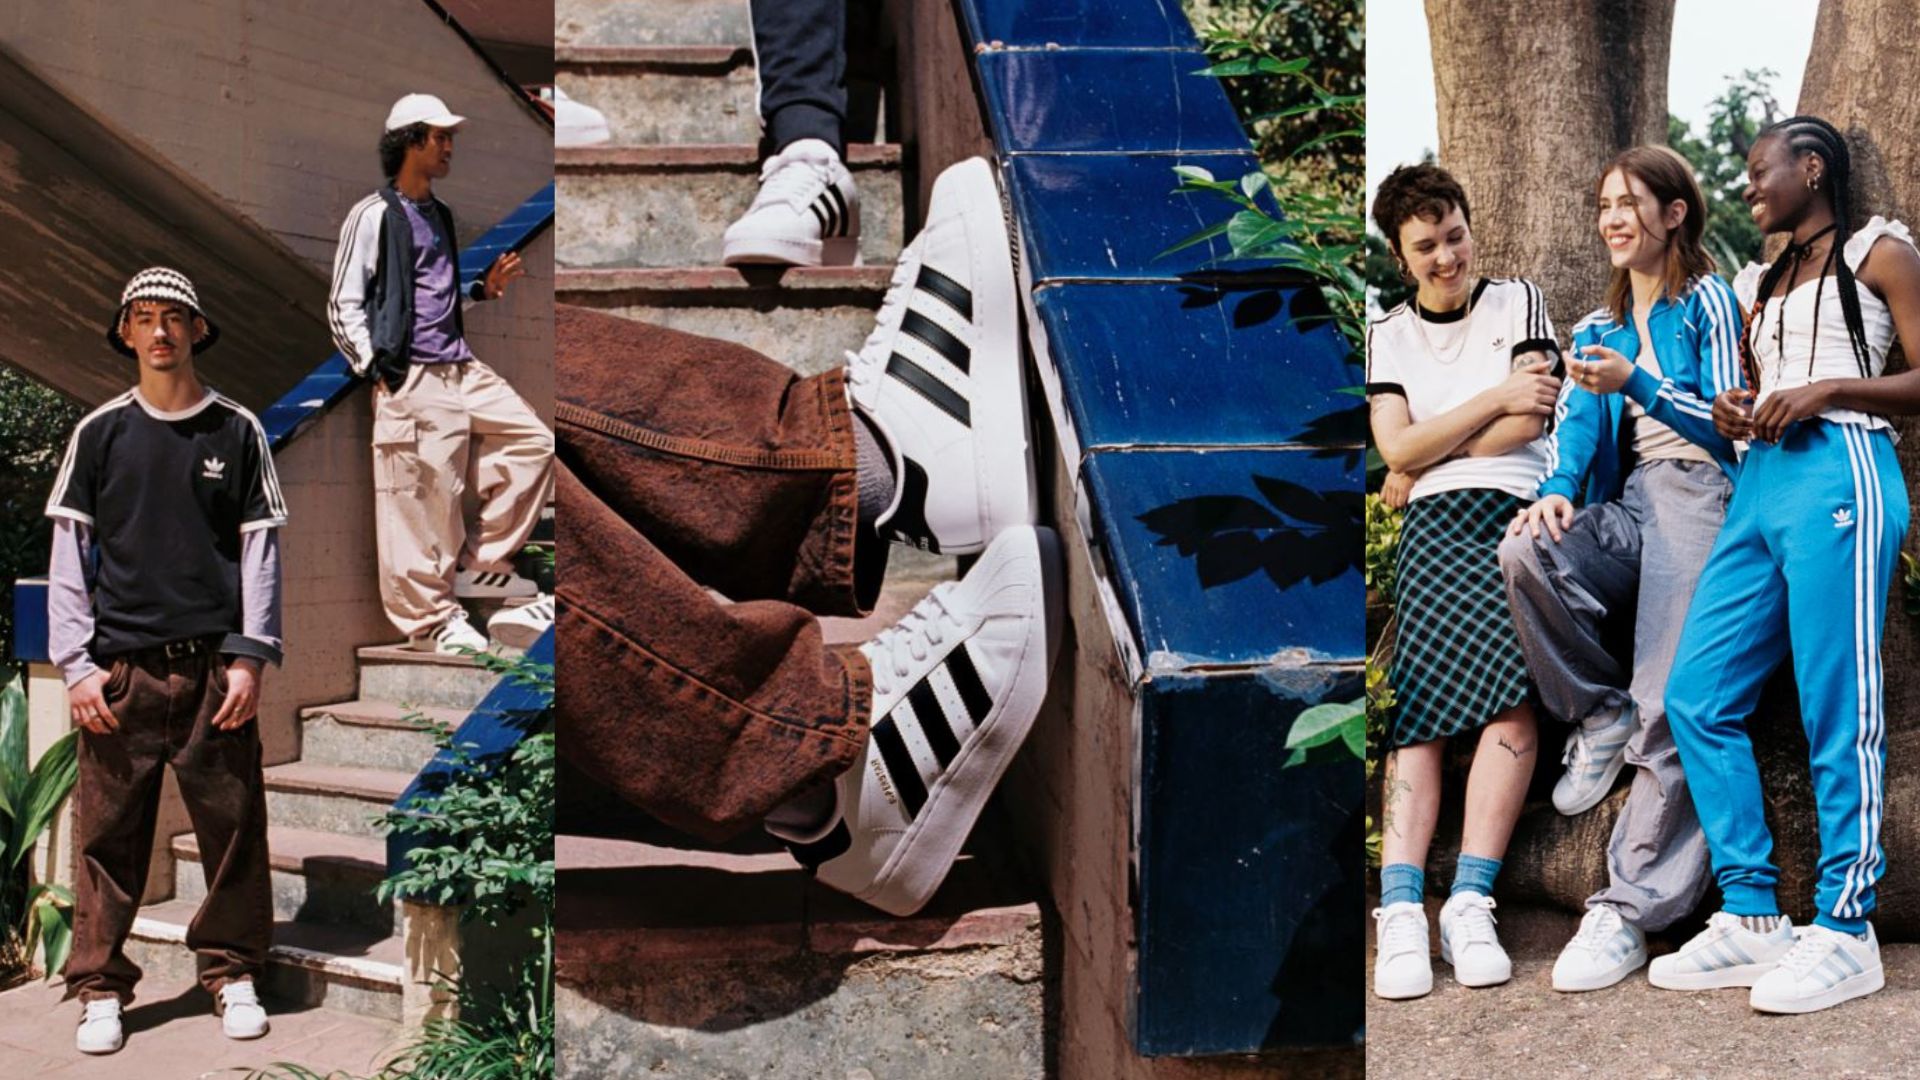 Adidas Superstar XLG: Totes What You Need To Step Up Your Fashion